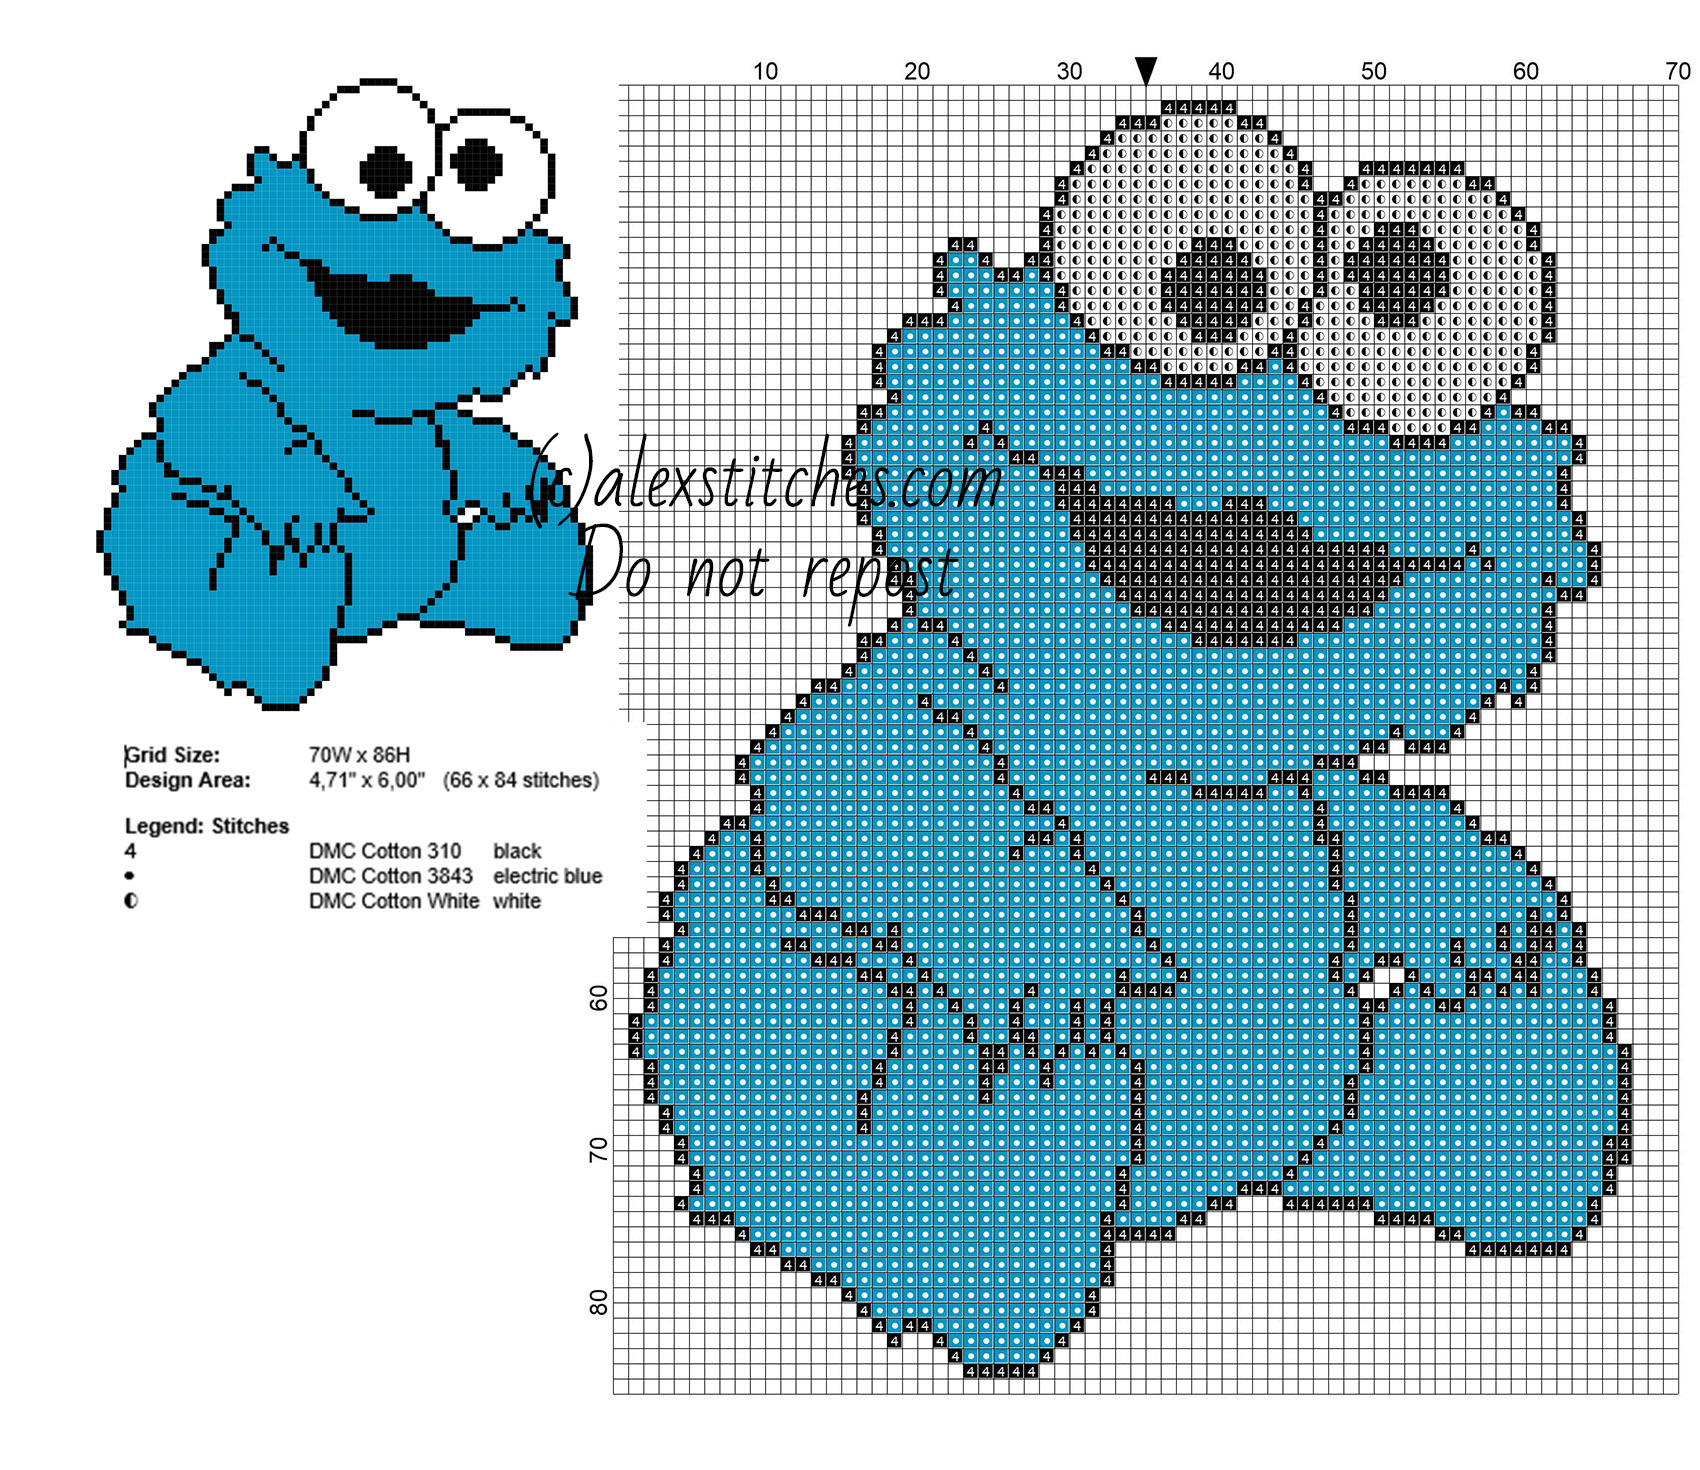 Baby Cookie Monster cross stitch pattern The Muppets cartoons